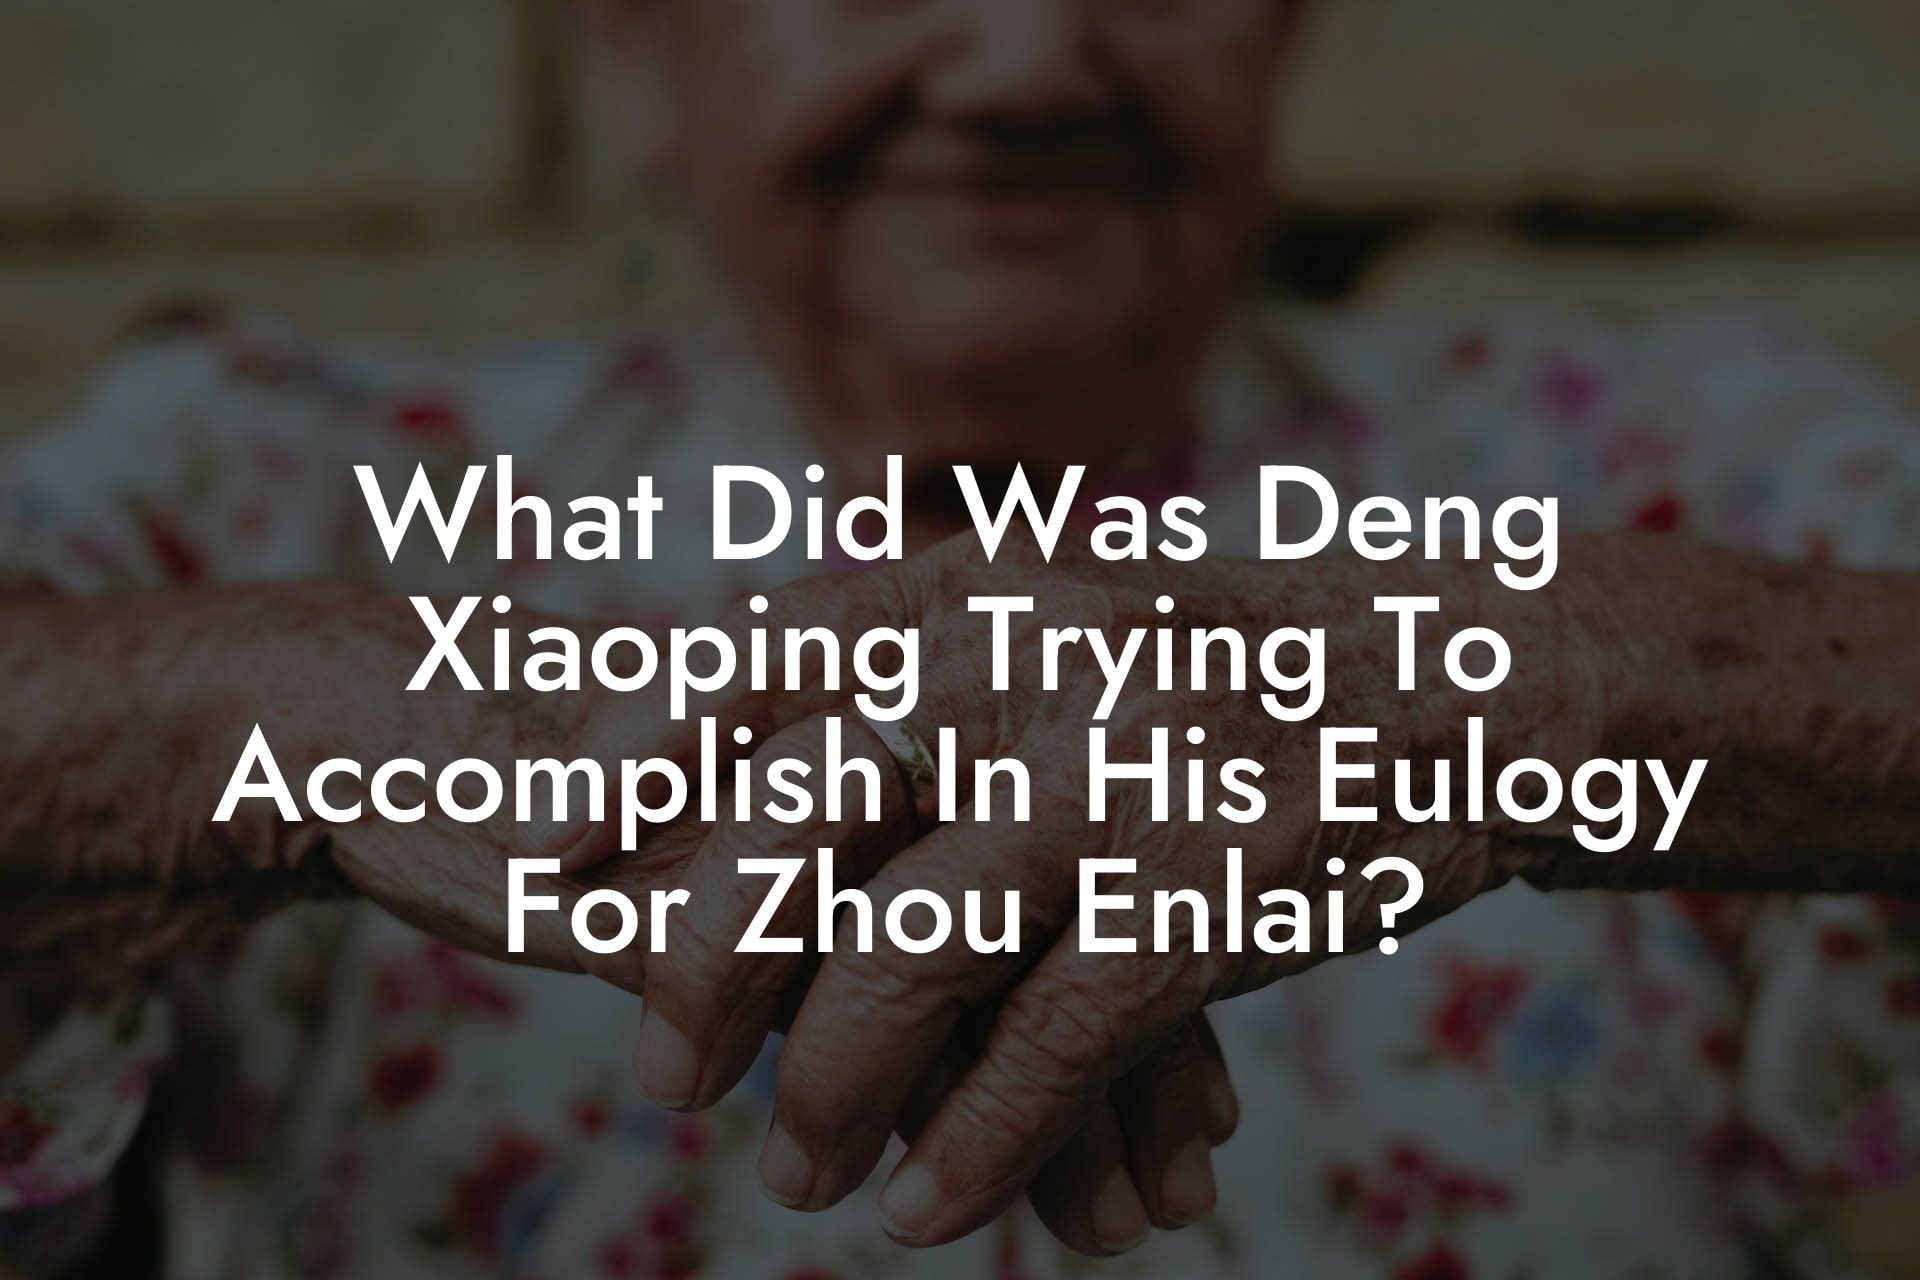 What Did Was Deng Xiaoping Trying To Accomplish In His Eulogy For Zhou Enlai?